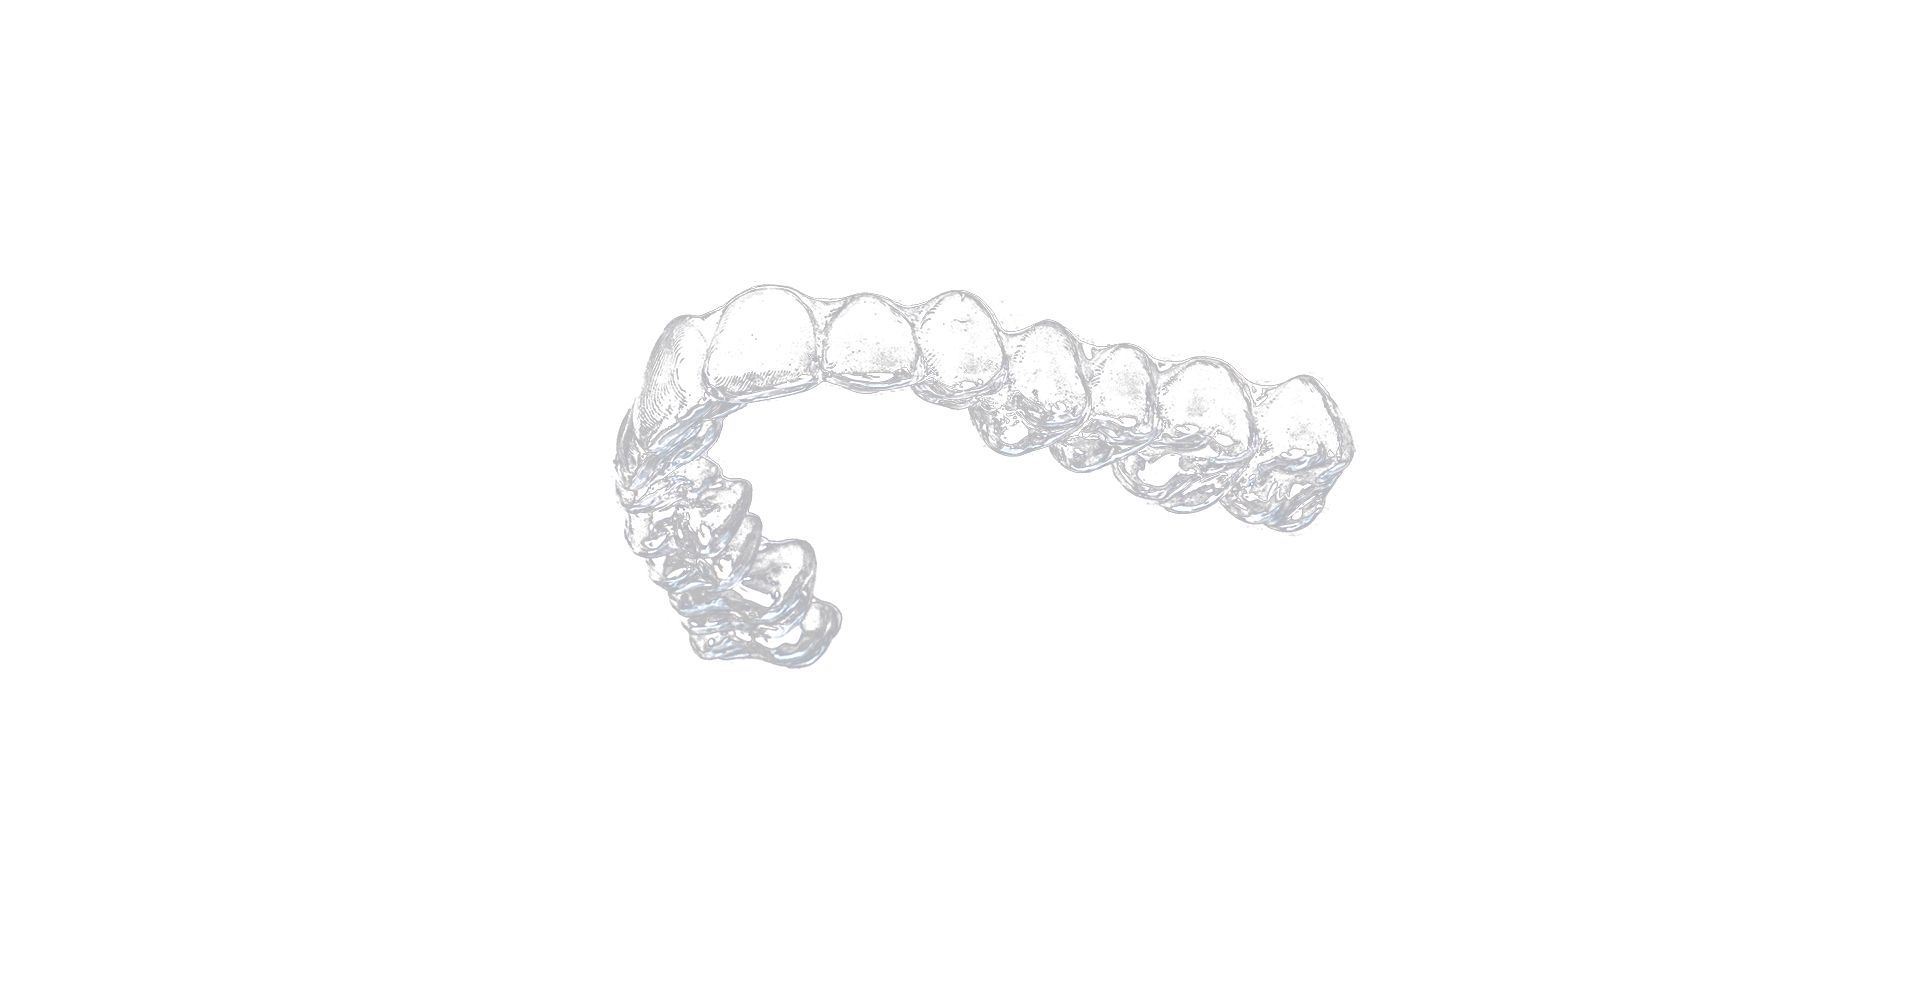 GADOS is more than just a producer of aligners, it is a professional innovative entrepreneurship that provides continuous support all the way